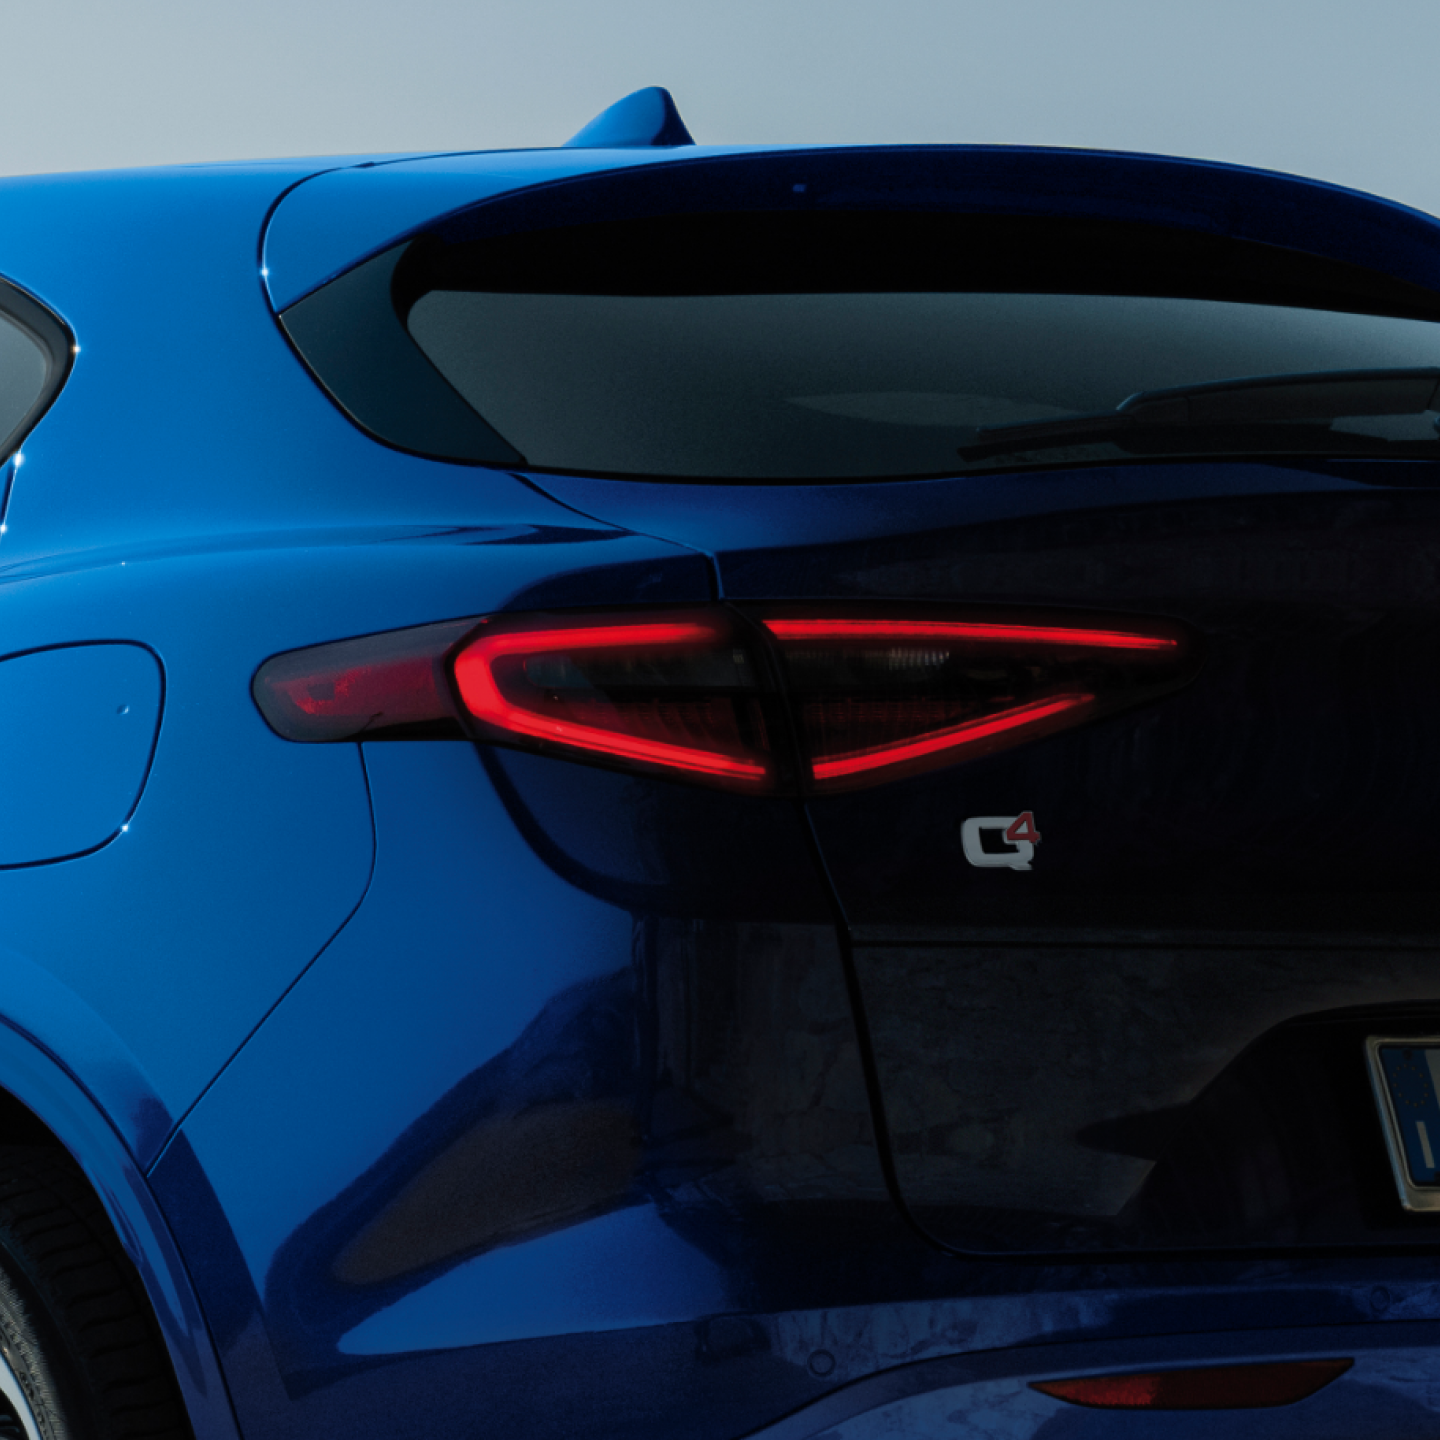 Rear lights with unmistakable LED signature